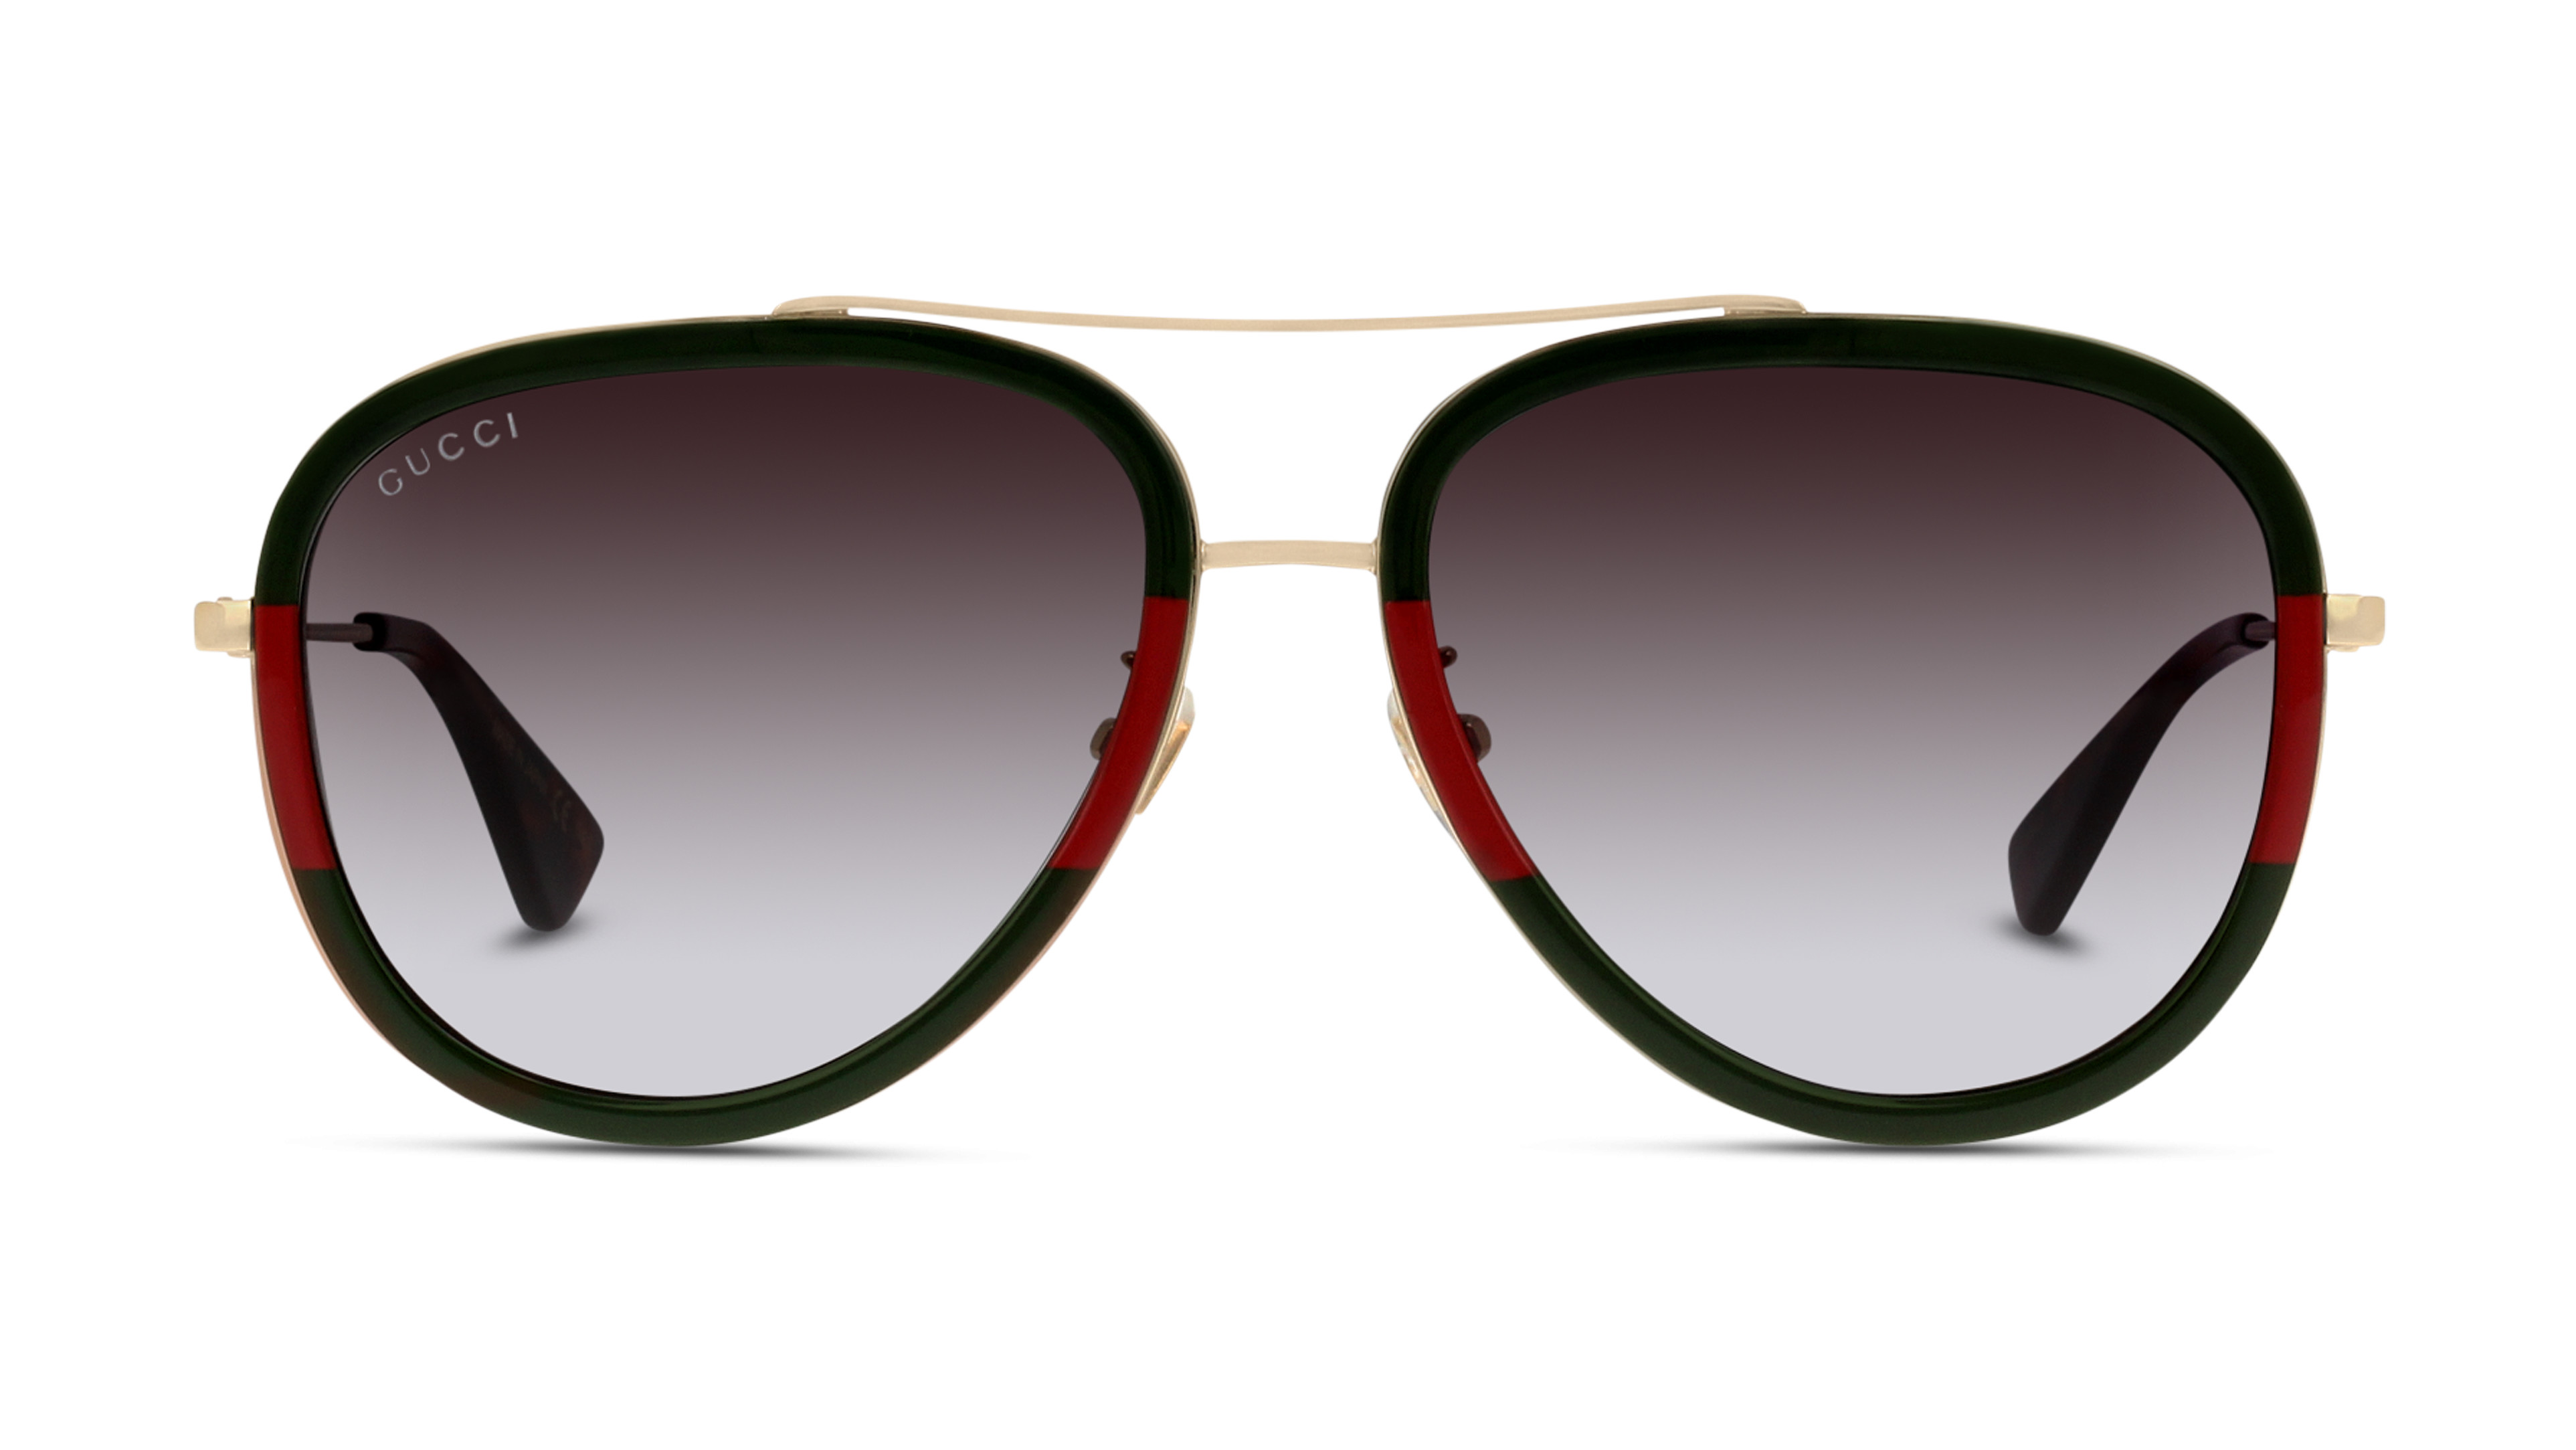 [products.image.front] Gucci GG0062S 003 Sonnenbrille